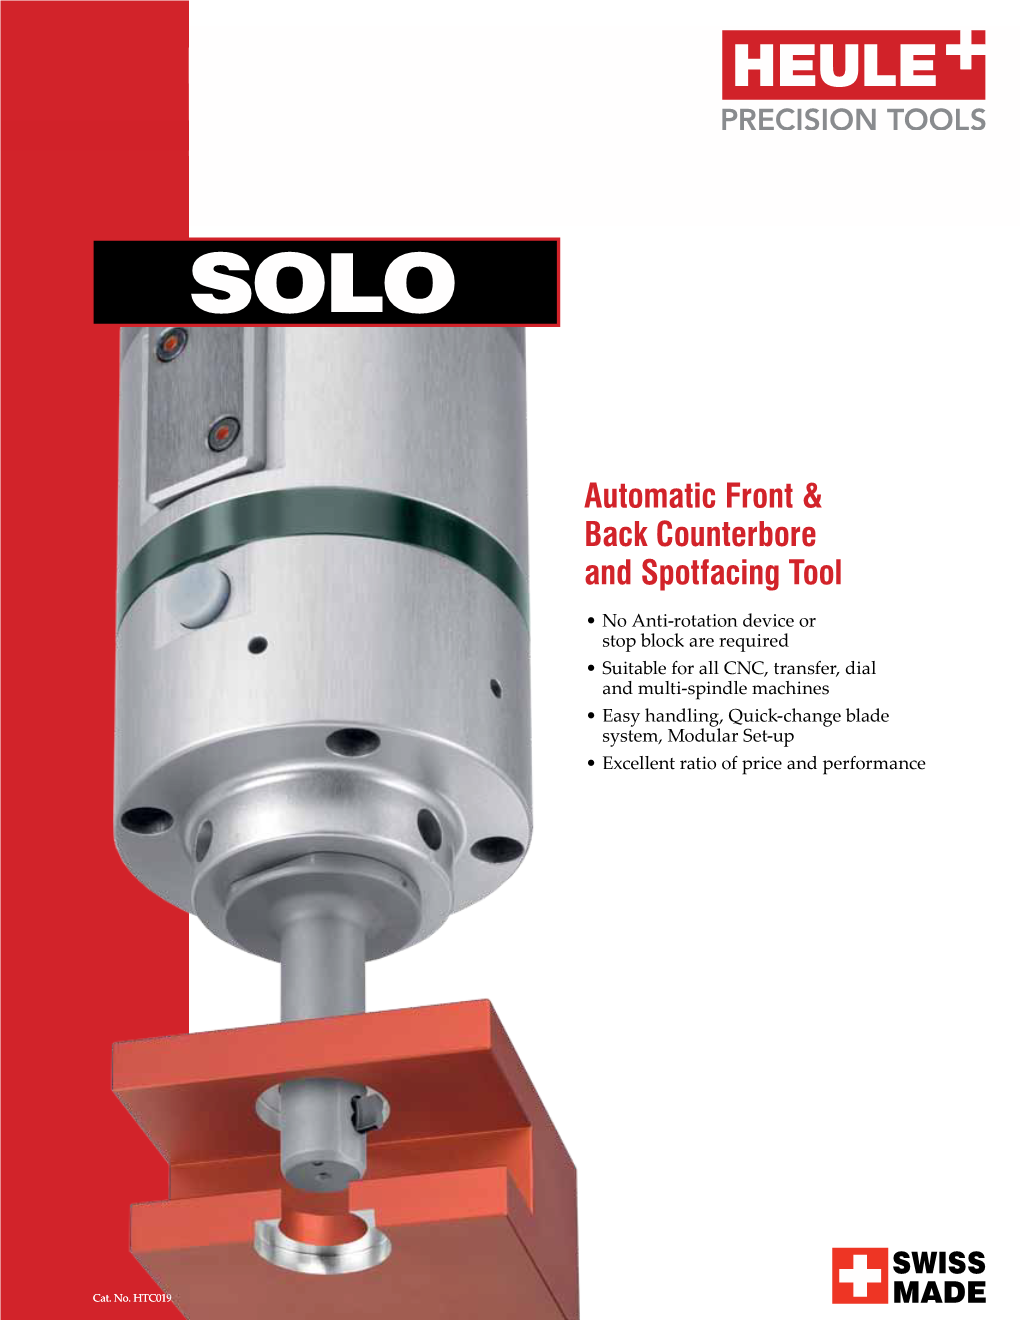 Automatic Front & Back Counterbore and Spotfacing Tool